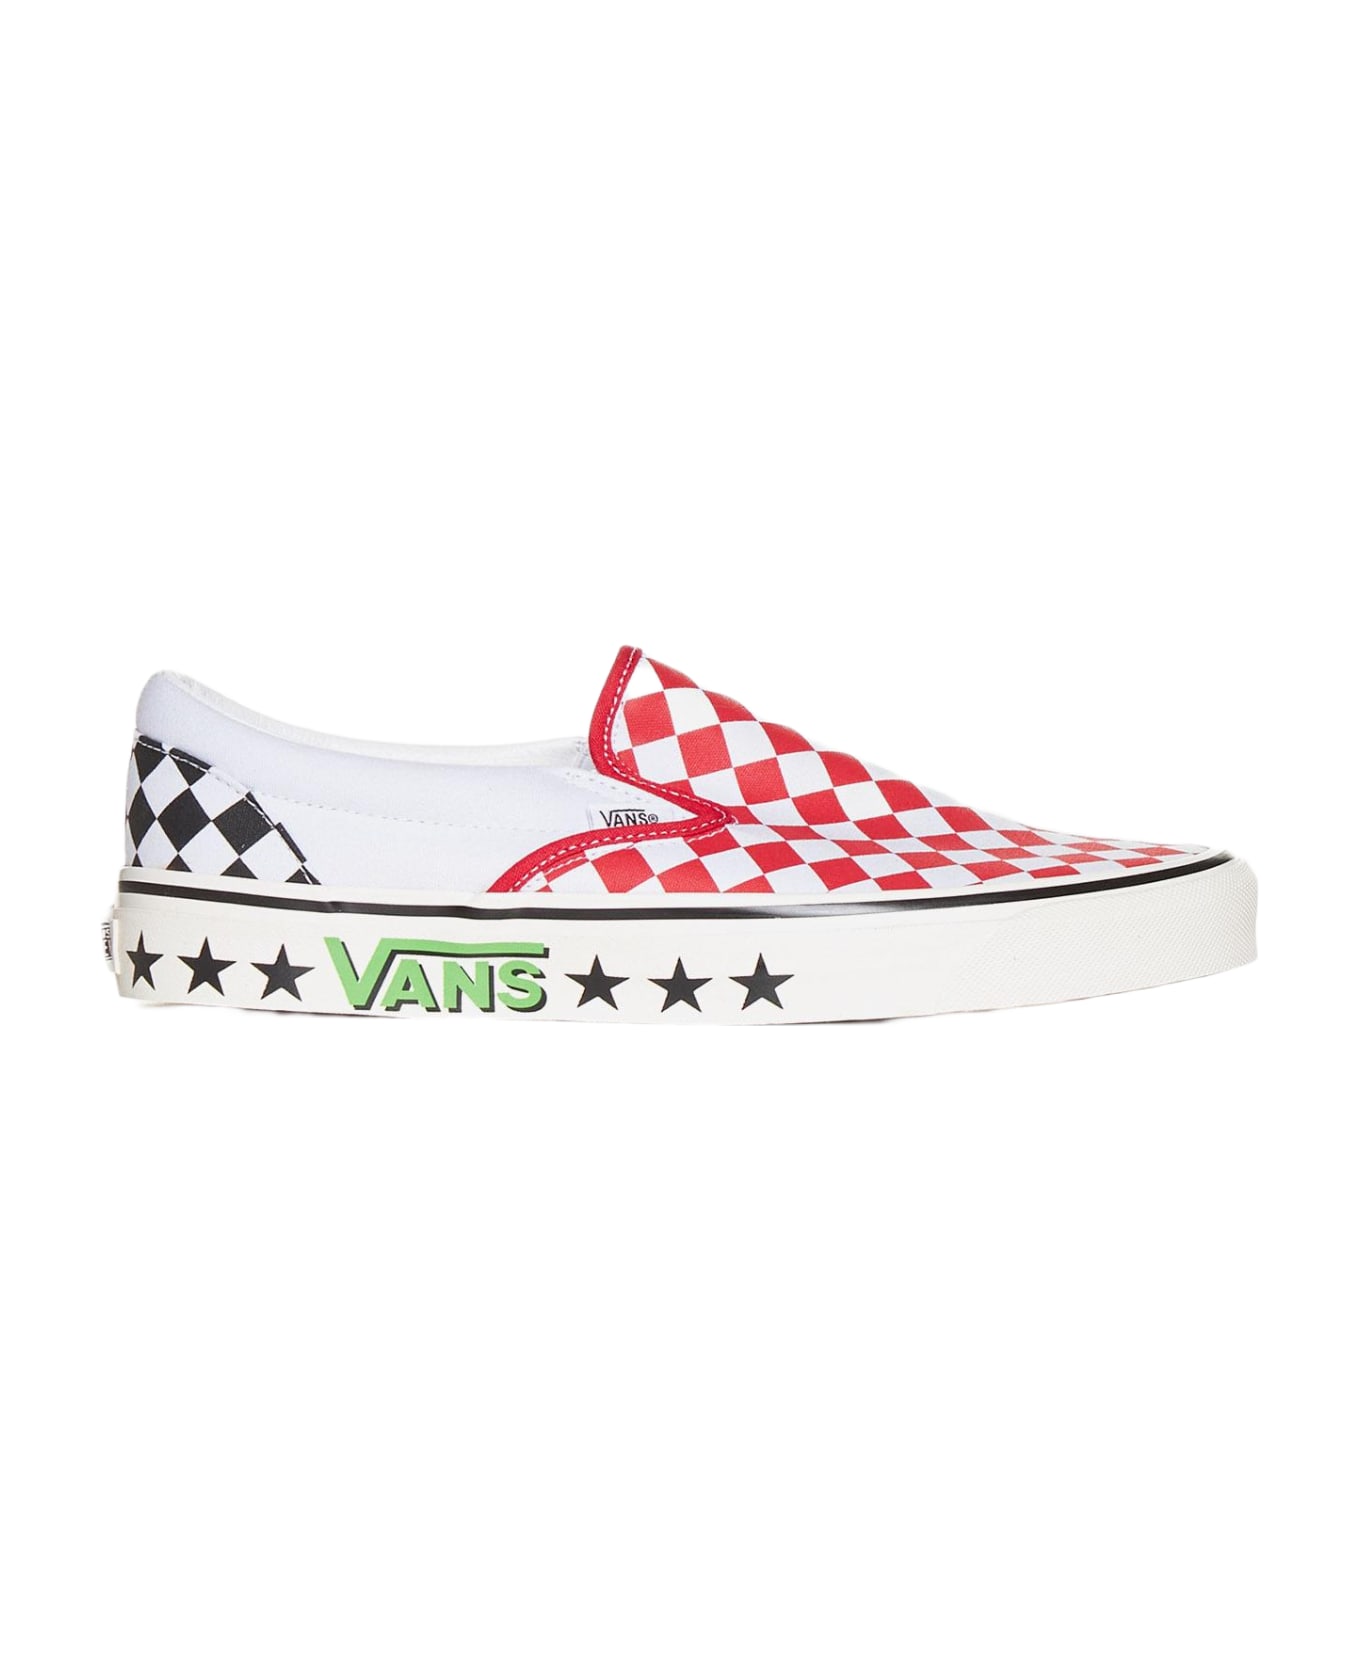 Vans Classic Slip-on 98 Dx Canvas Sneakers - Red/white スニーカー